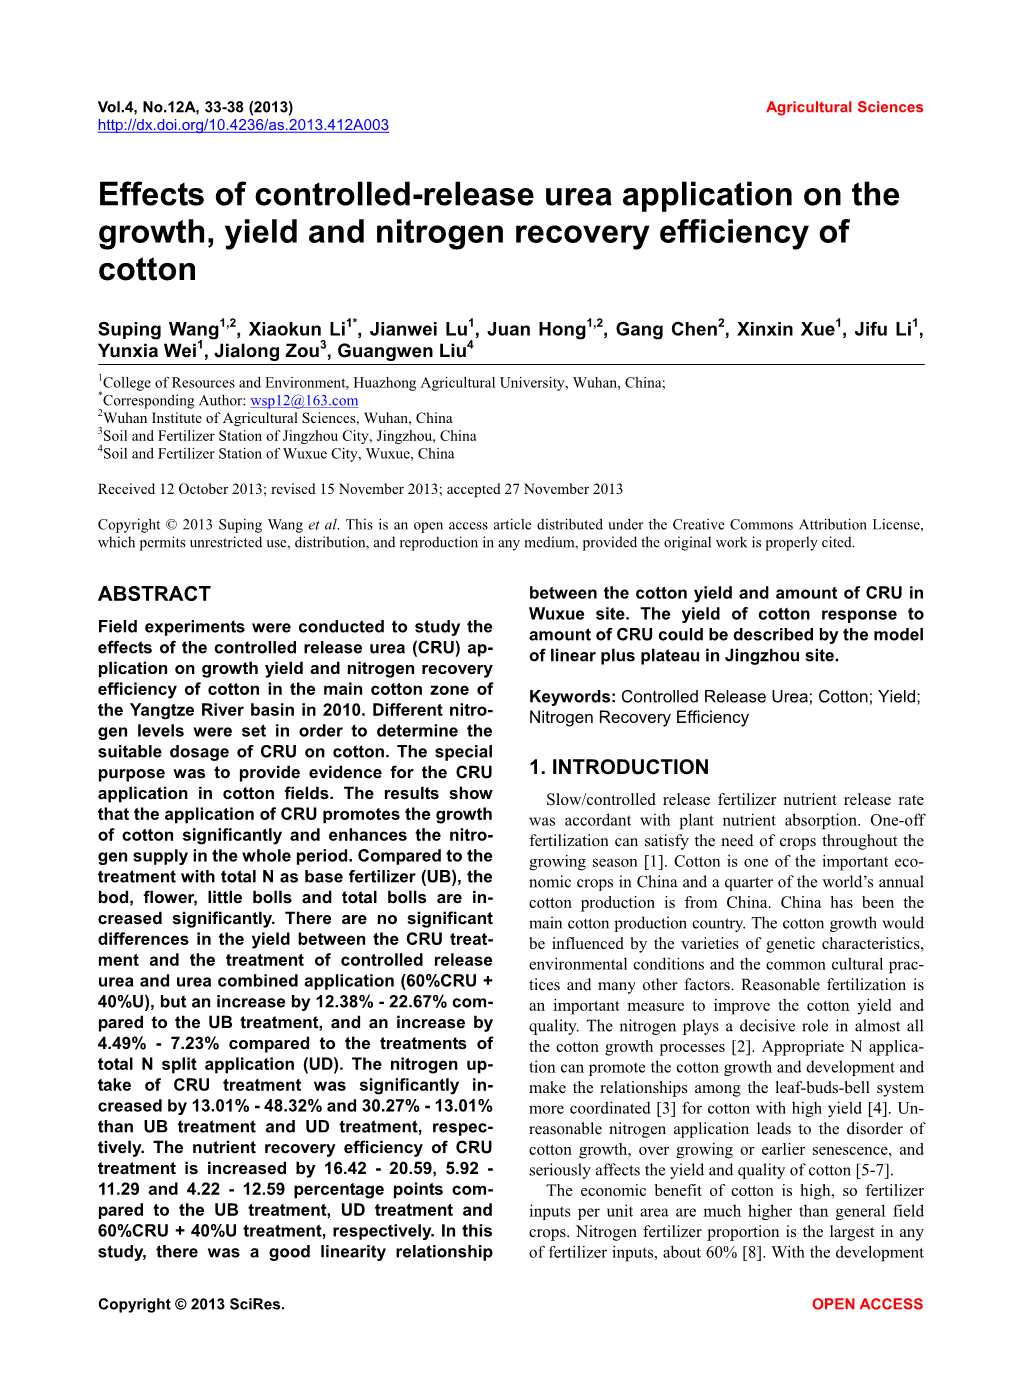 Effects of Controlled-Release Urea Application on the Growth, Yield and Nitrogen Recovery Efficiency of Cotton